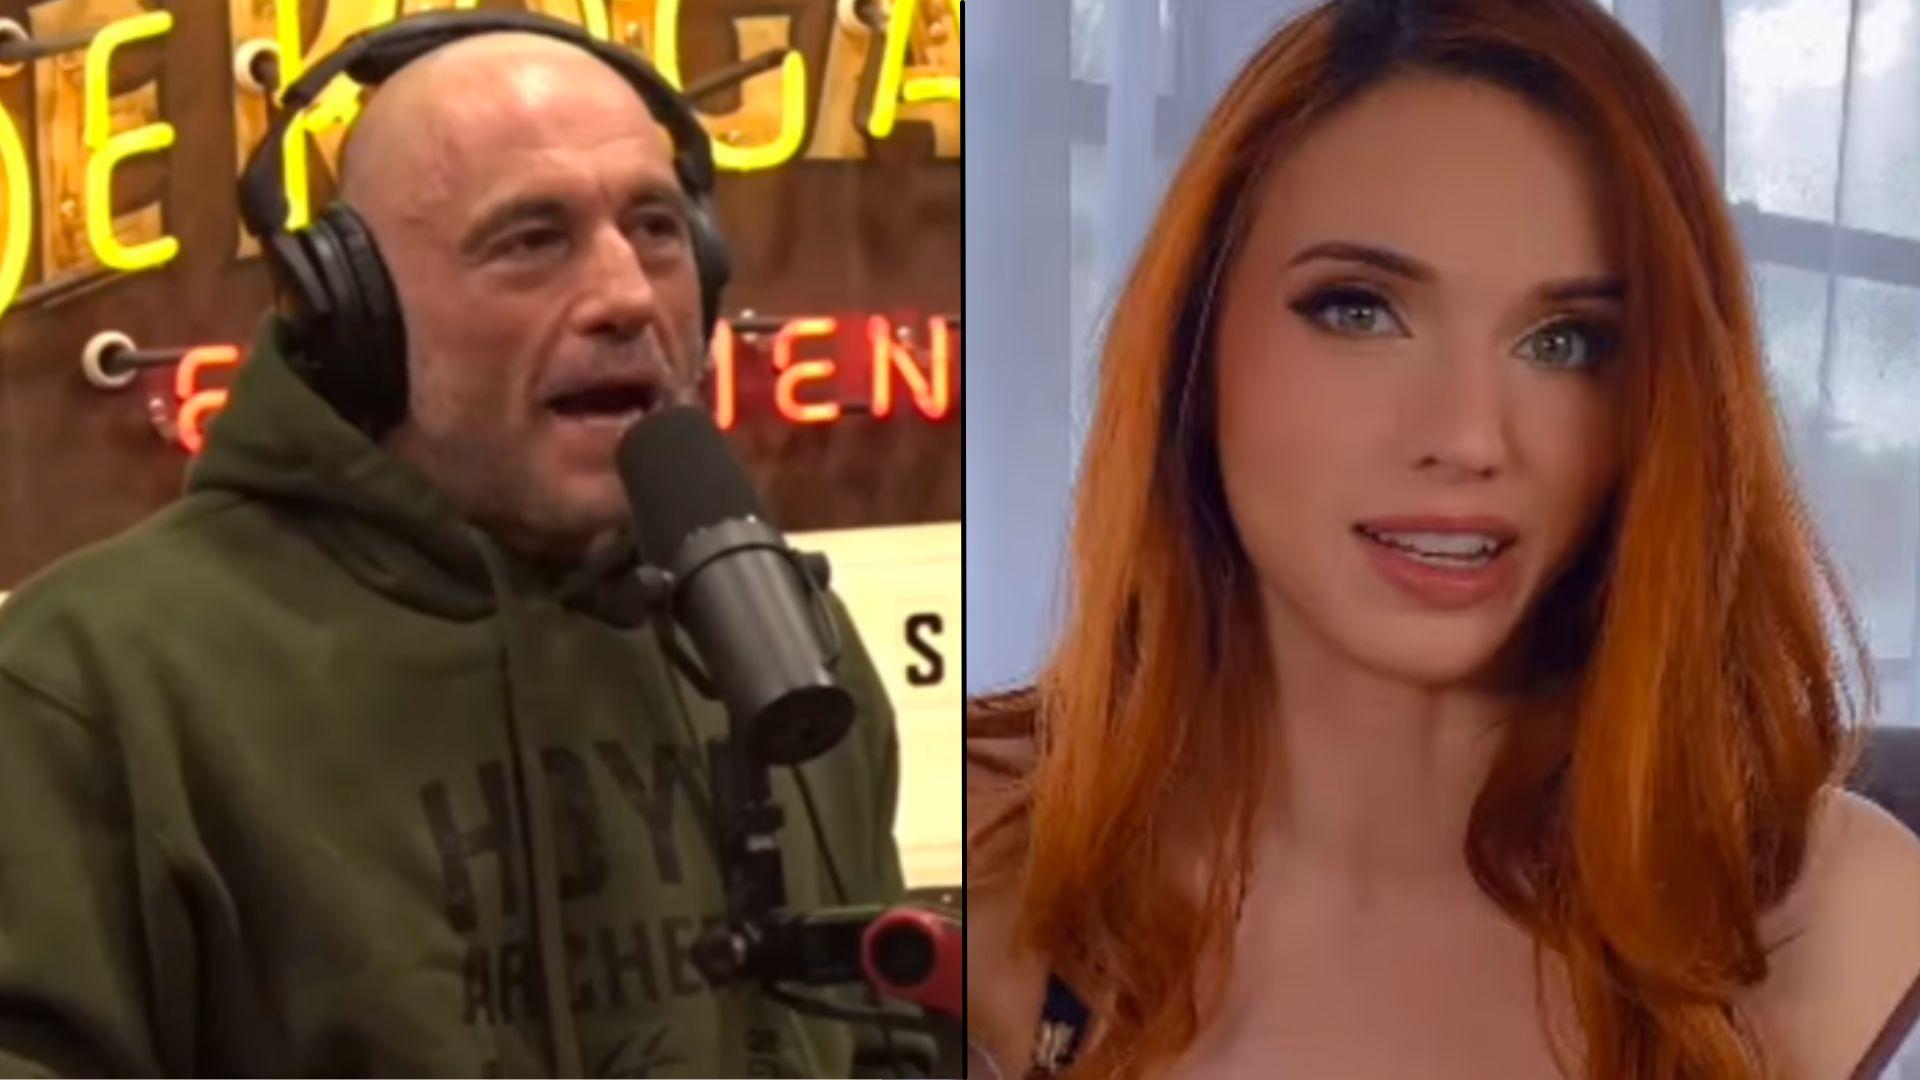 Joe Rogan and Amouranth side-by-side talking to camera